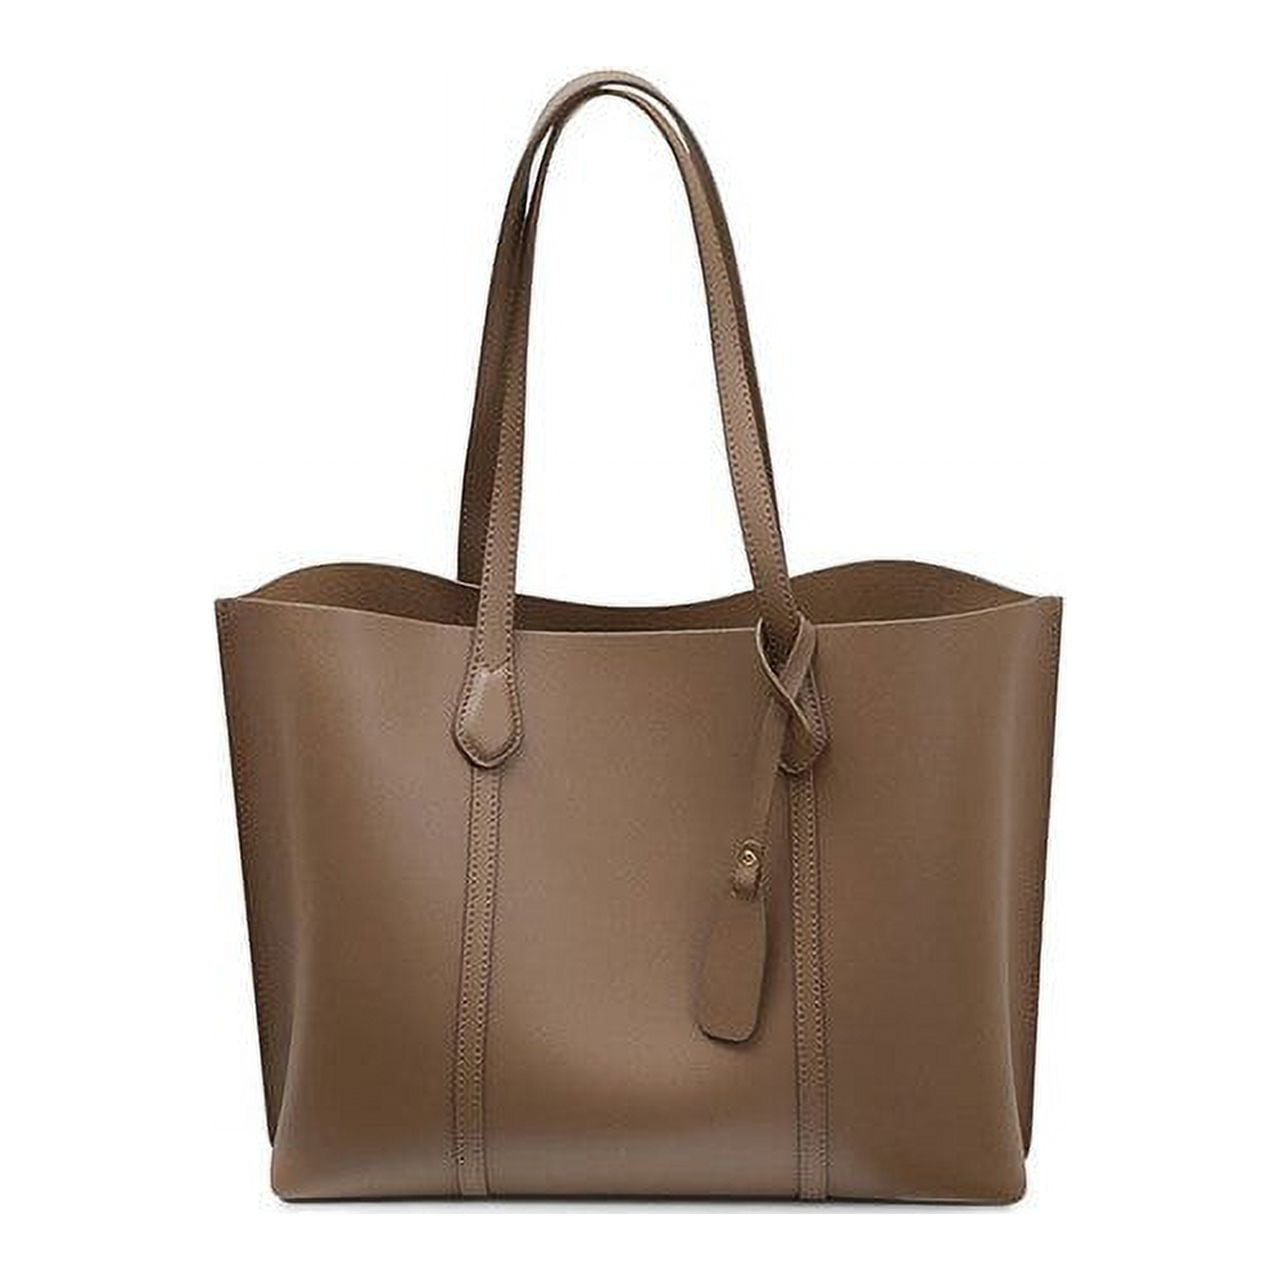 This Leather Tote Bag Is on Sale for $42 at Amazon